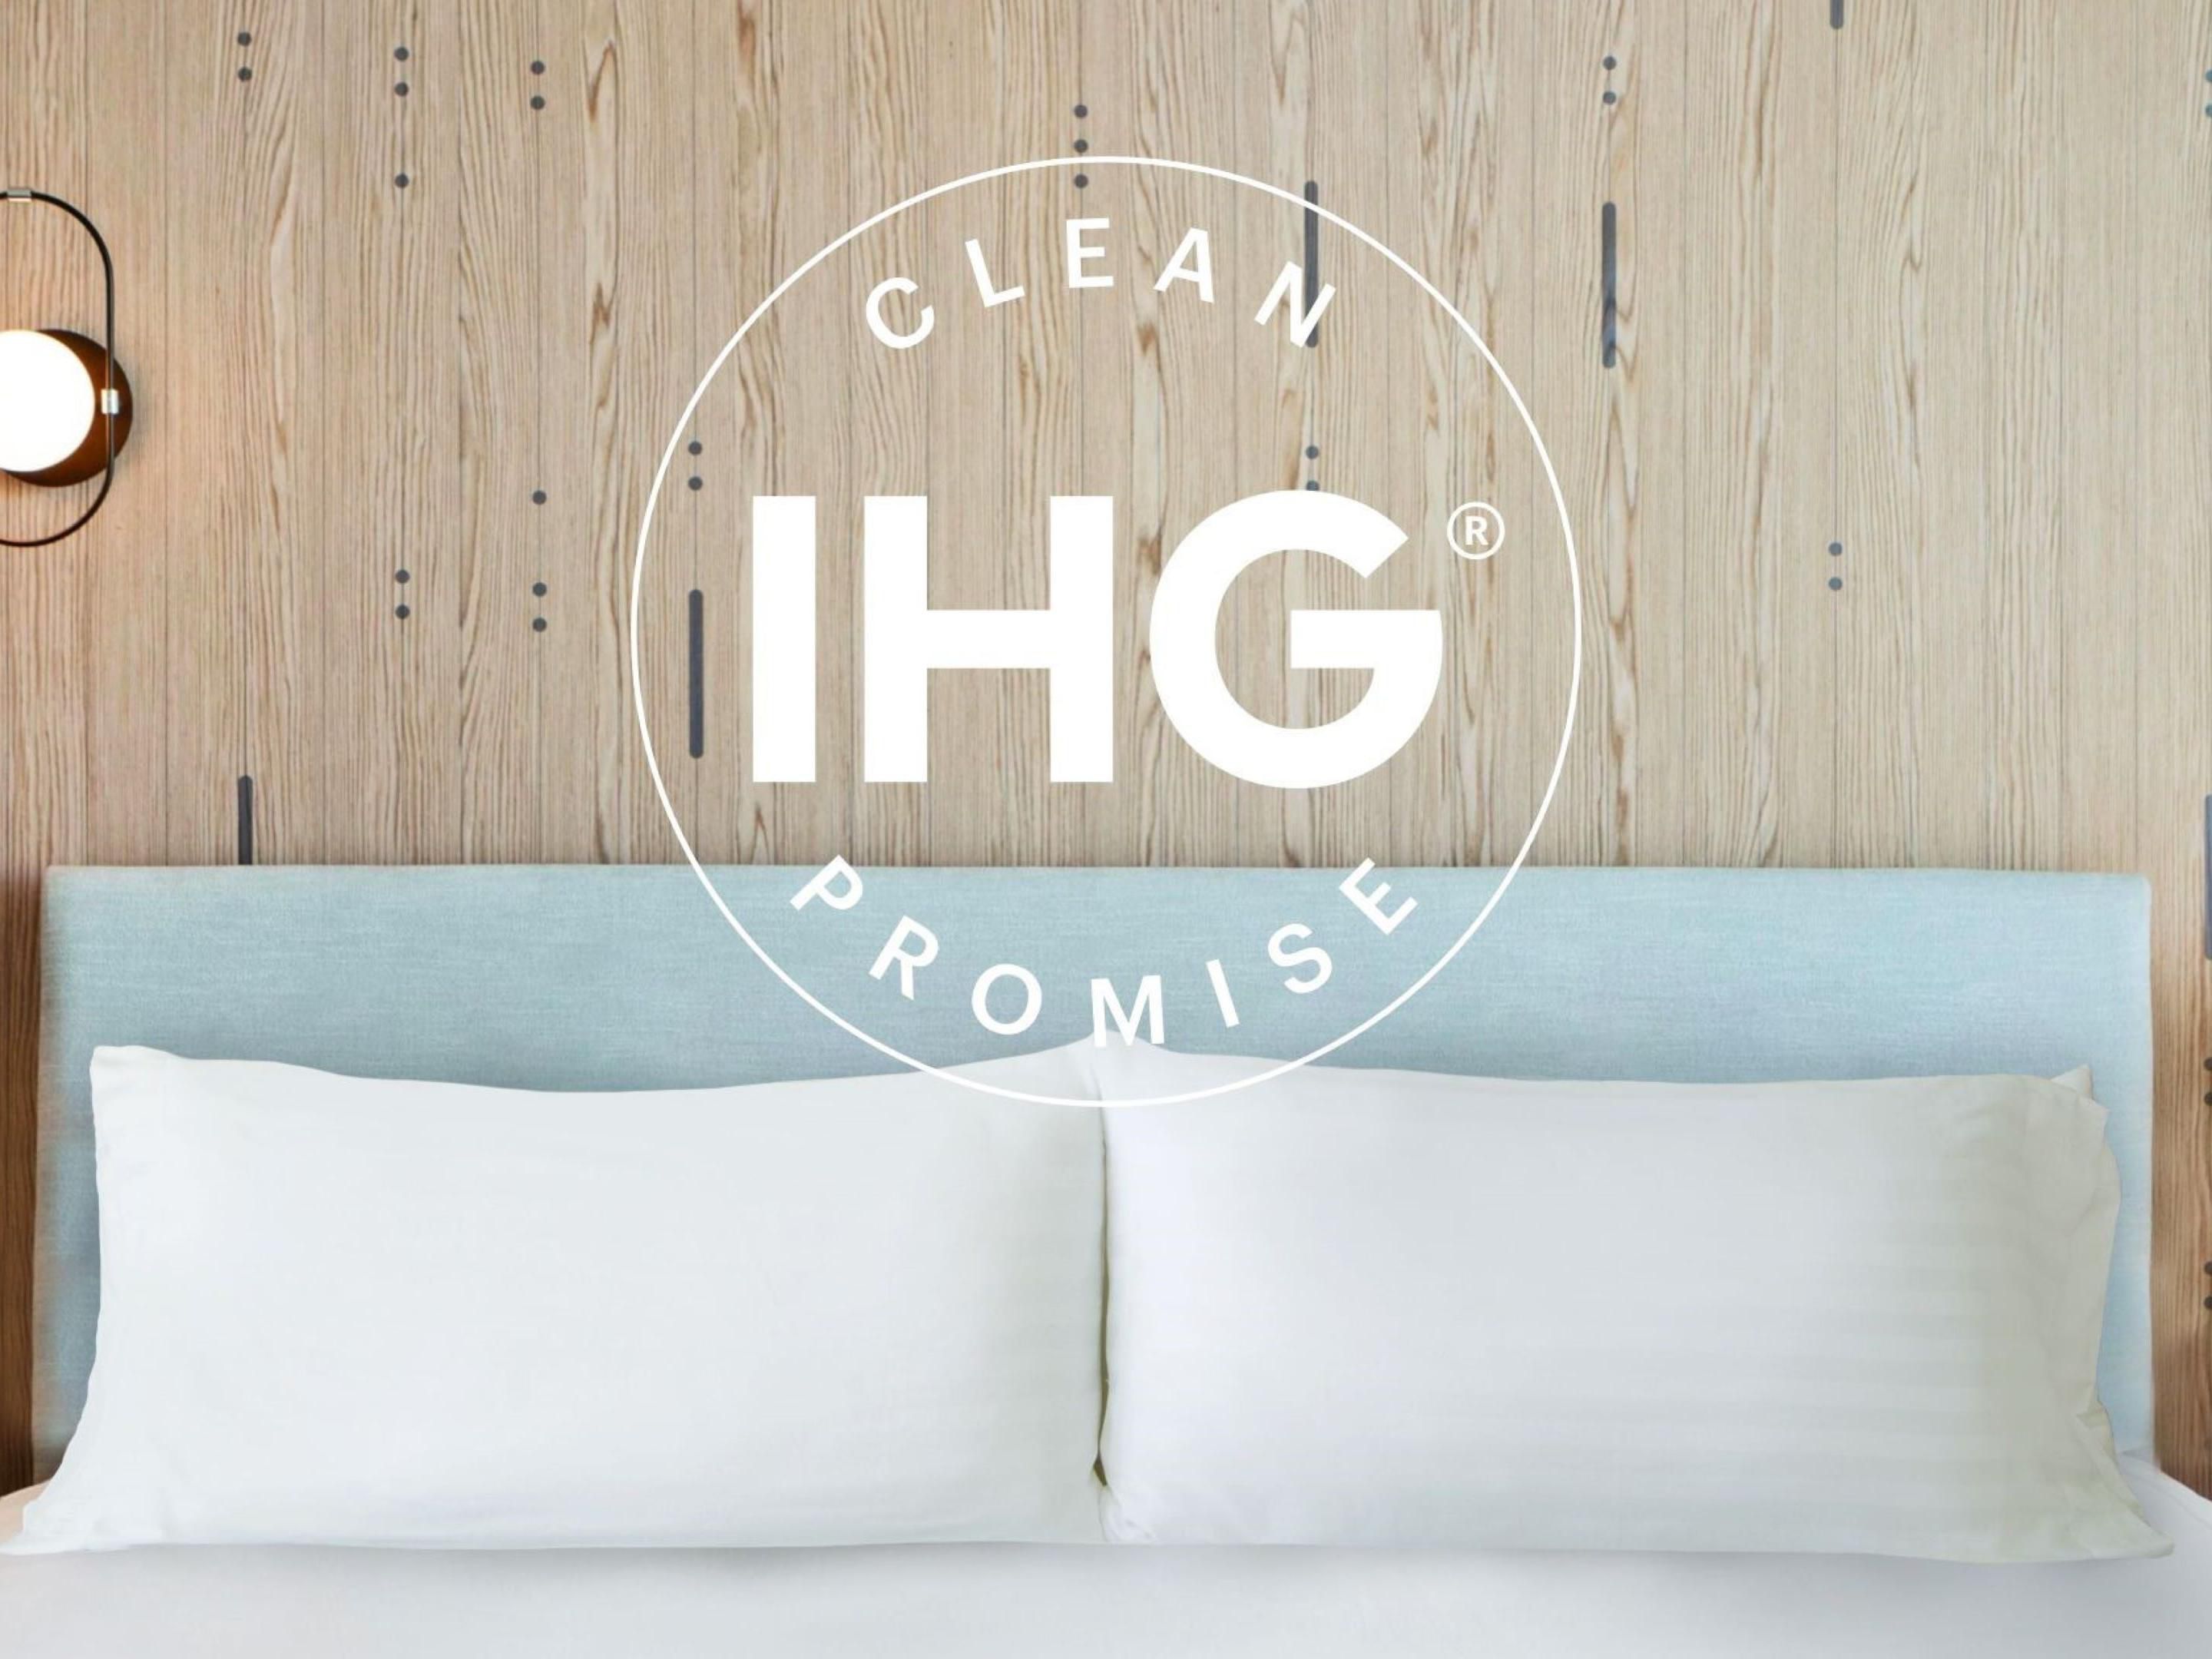 As the world adjusts to new travel norms and expectations, we’re enhancing the experience for you, our hotel guests, by redefining cleanliness and supporting wellbeing throughout your stay.